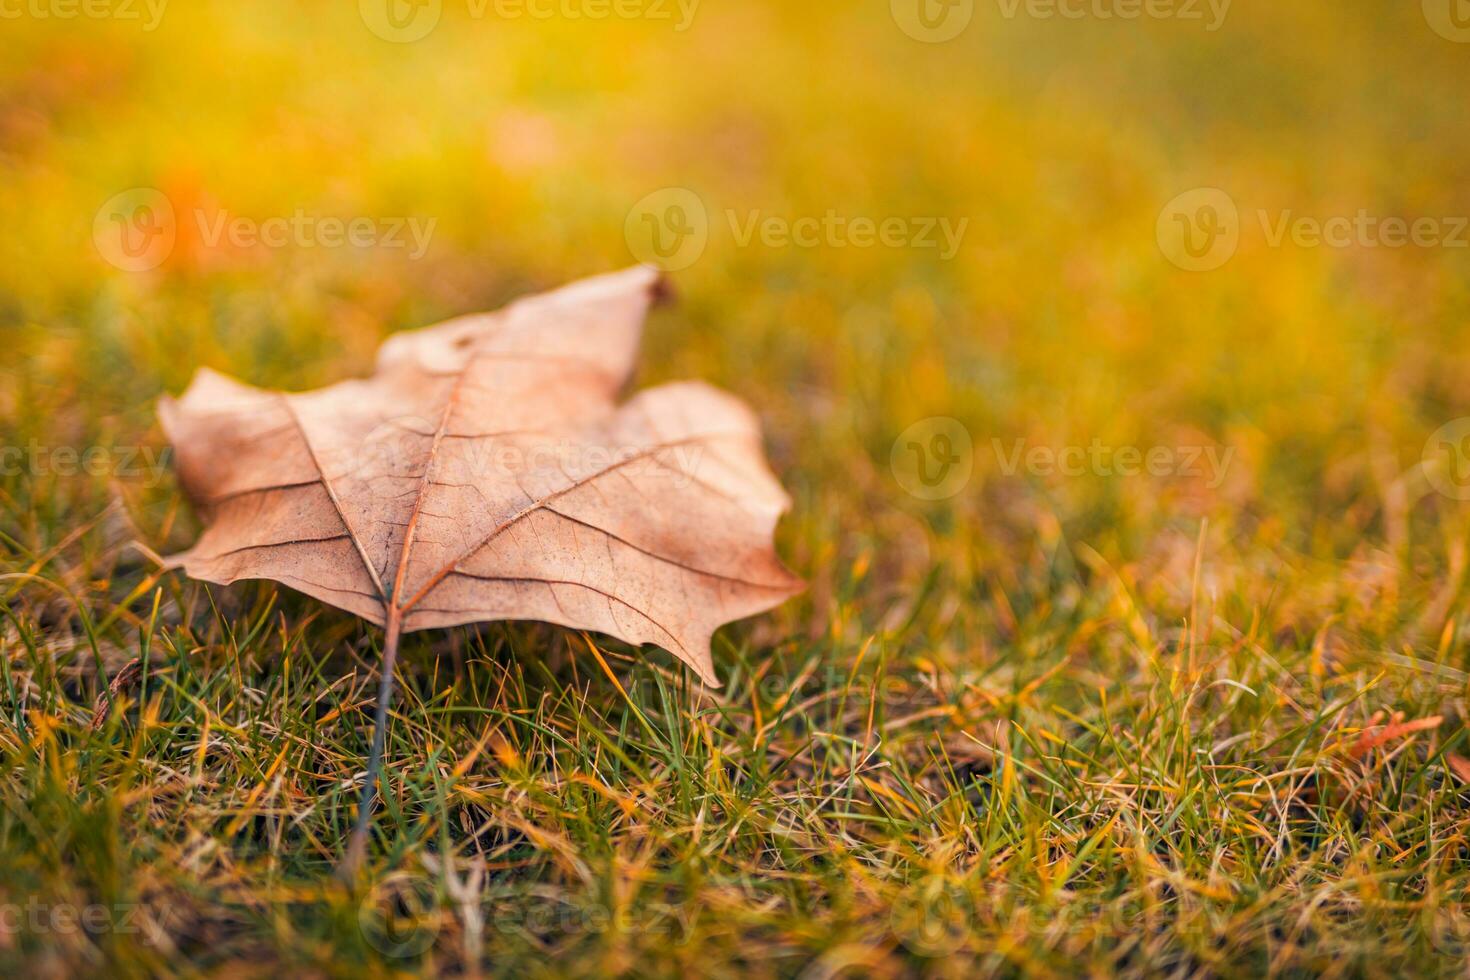 Texture of dry dead autumn leaves on the ground under soft sunlight. Idyllic abstract nature background, relaxing colors. Spring autumn forest closeup photo